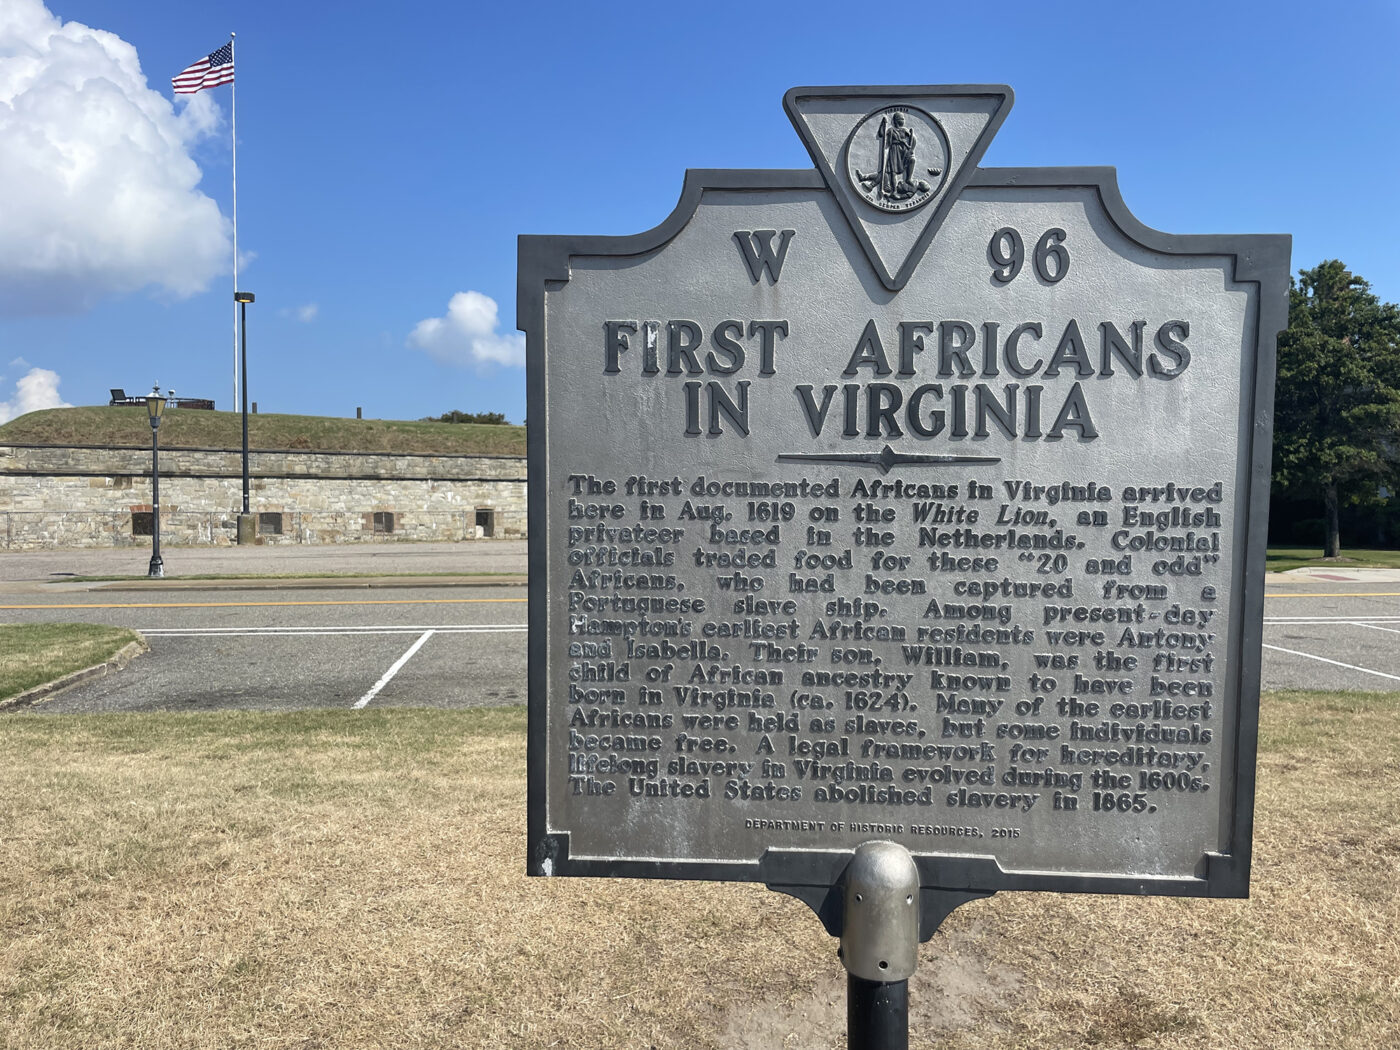 Virginia History, What is Virginia known for?